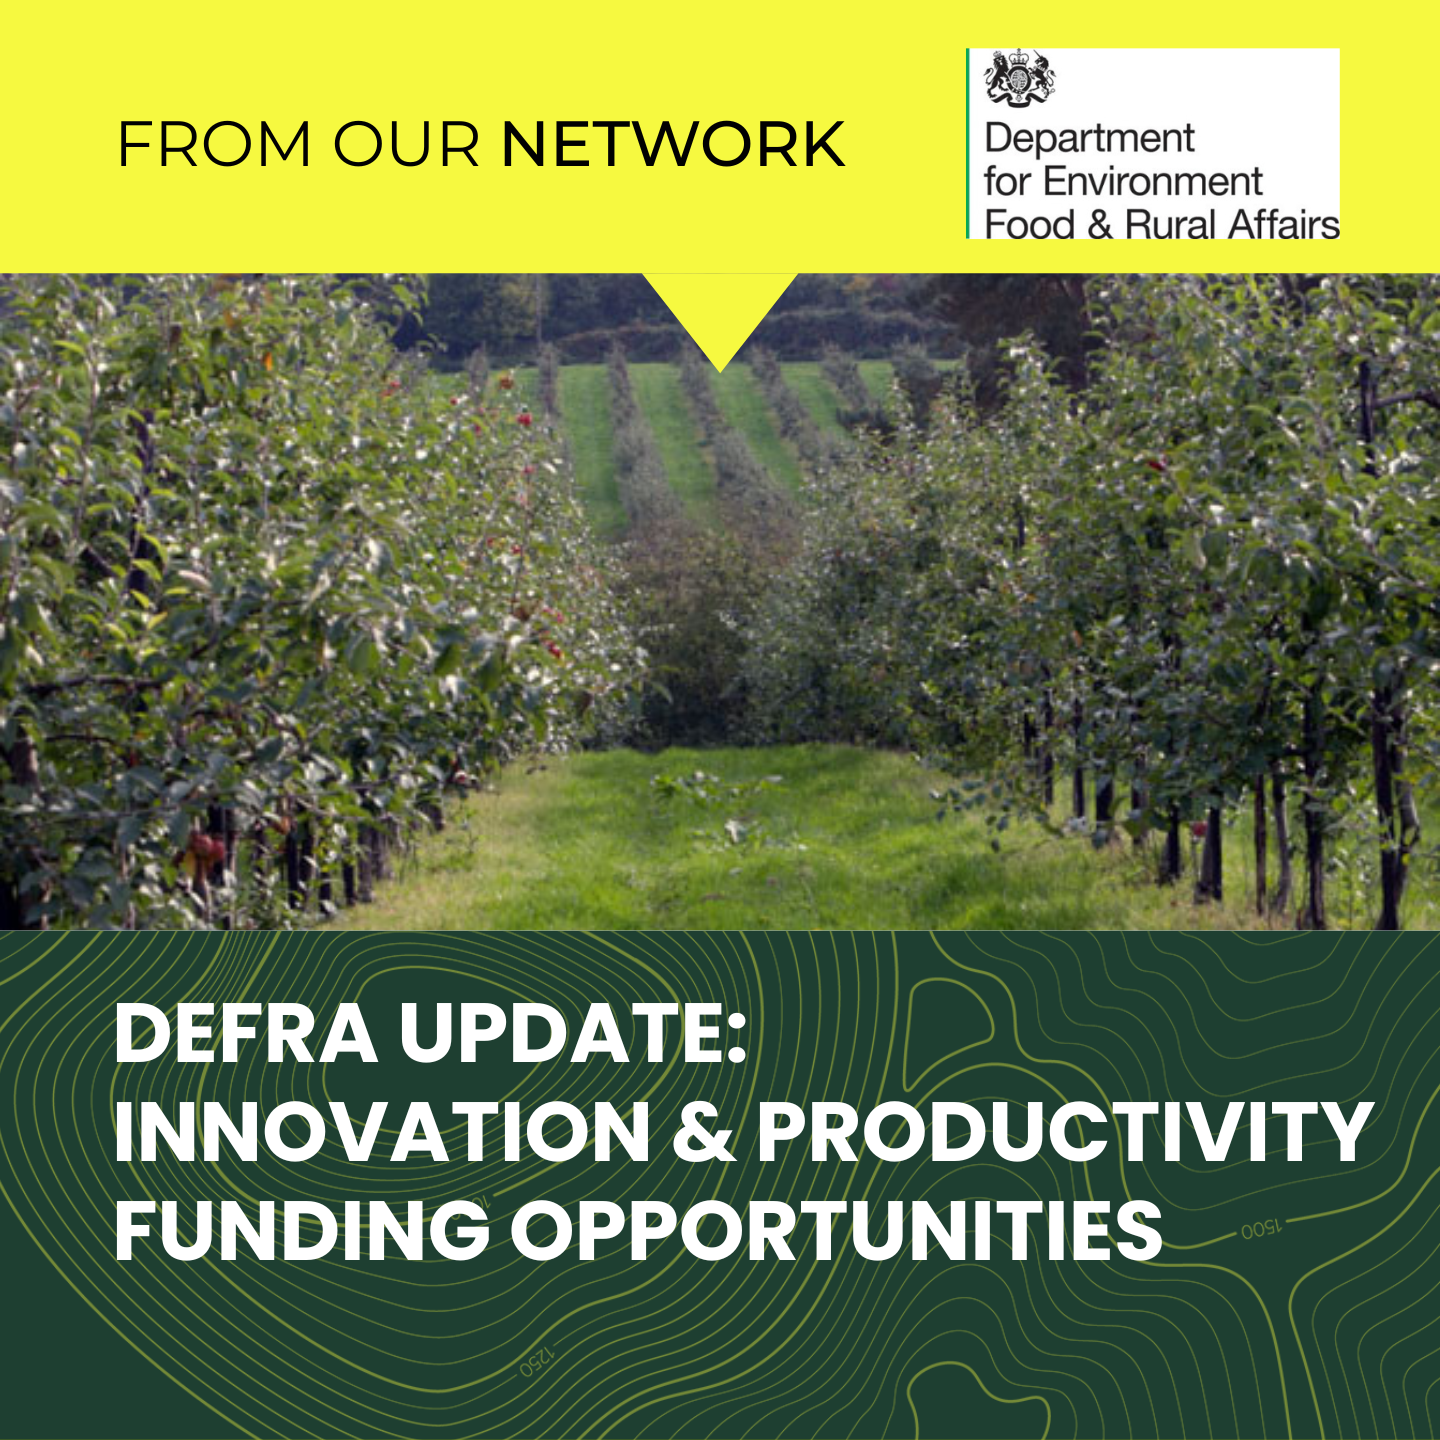 Innovation & Productivity Funding Opportunities